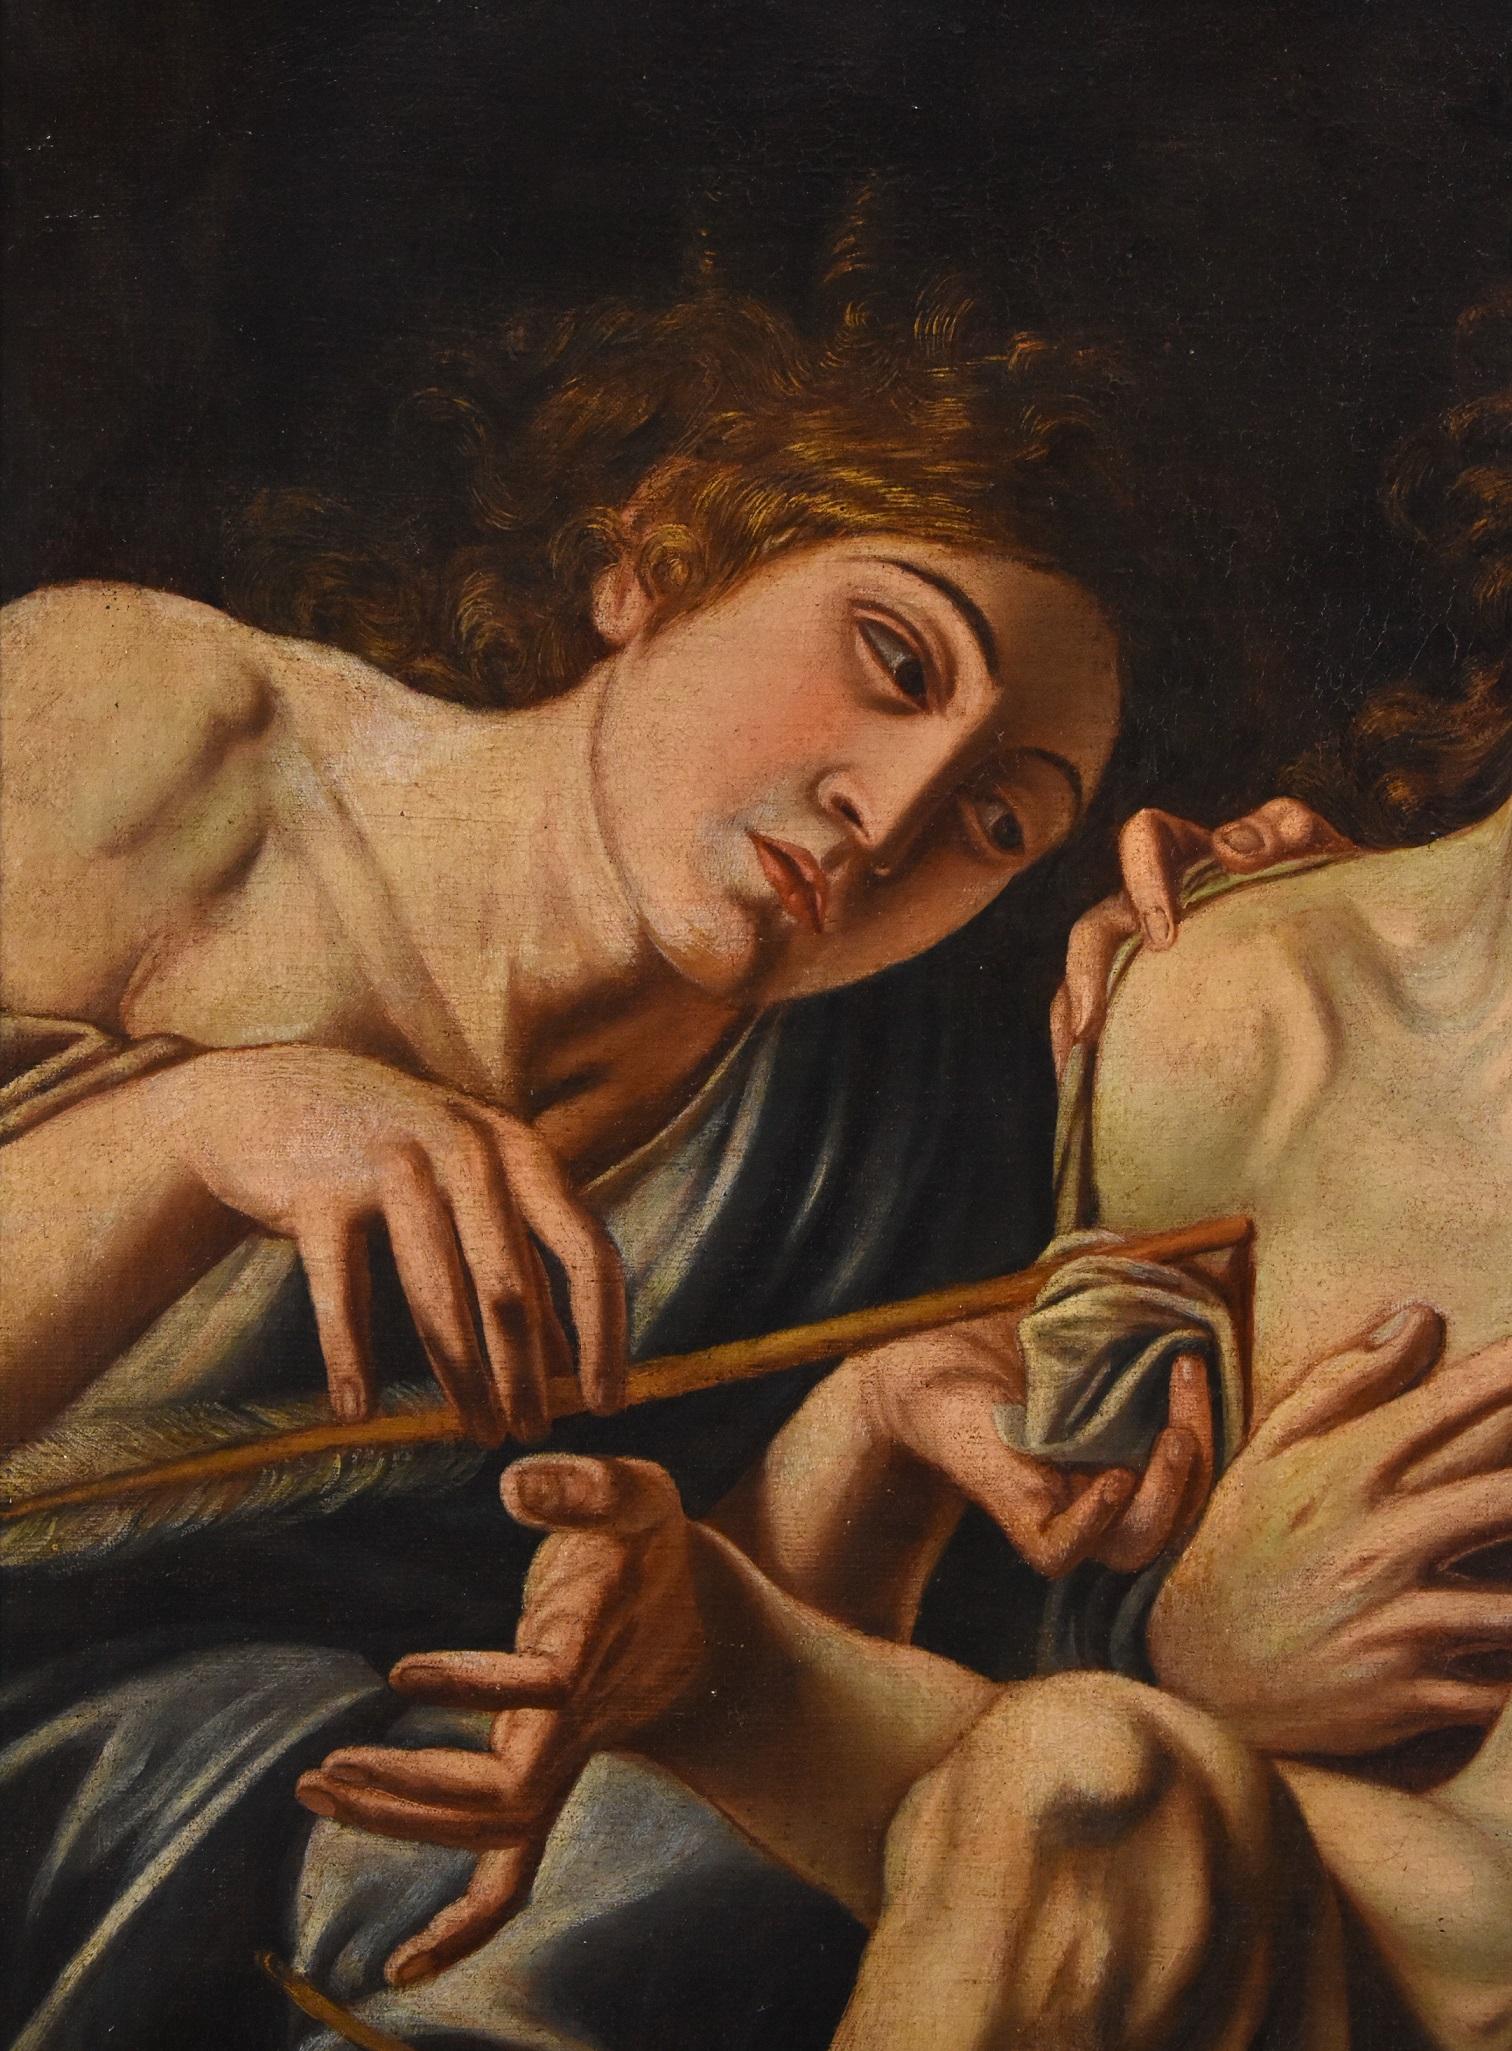 Saint Sebastian cured by angels
Antonio d'Enrico, called Tanzio da Varallo (Alagna Valsesia, c. 1582 - Varallo, 1633) - circle of

Oil on canvas
112 x 88 cm. - Framed 124 x 100 cm.

We share a painting of great fascination and intensity, depicting